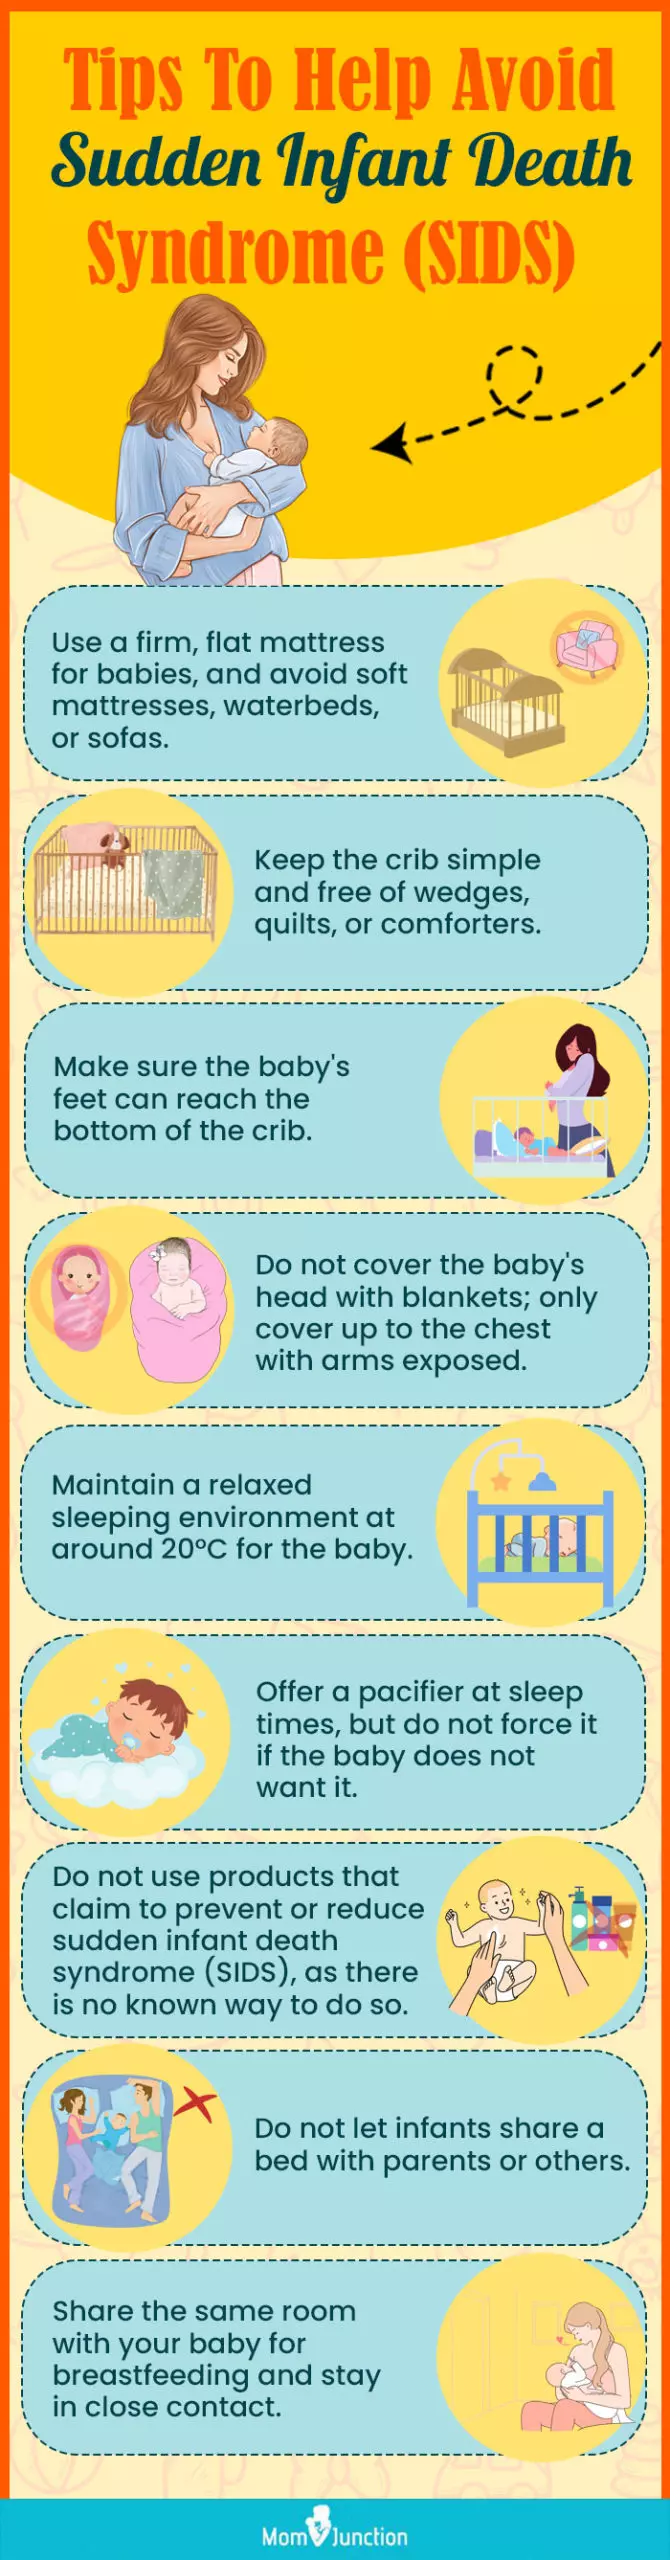 tips to help avoid sudden infant death syndrome (infographic)